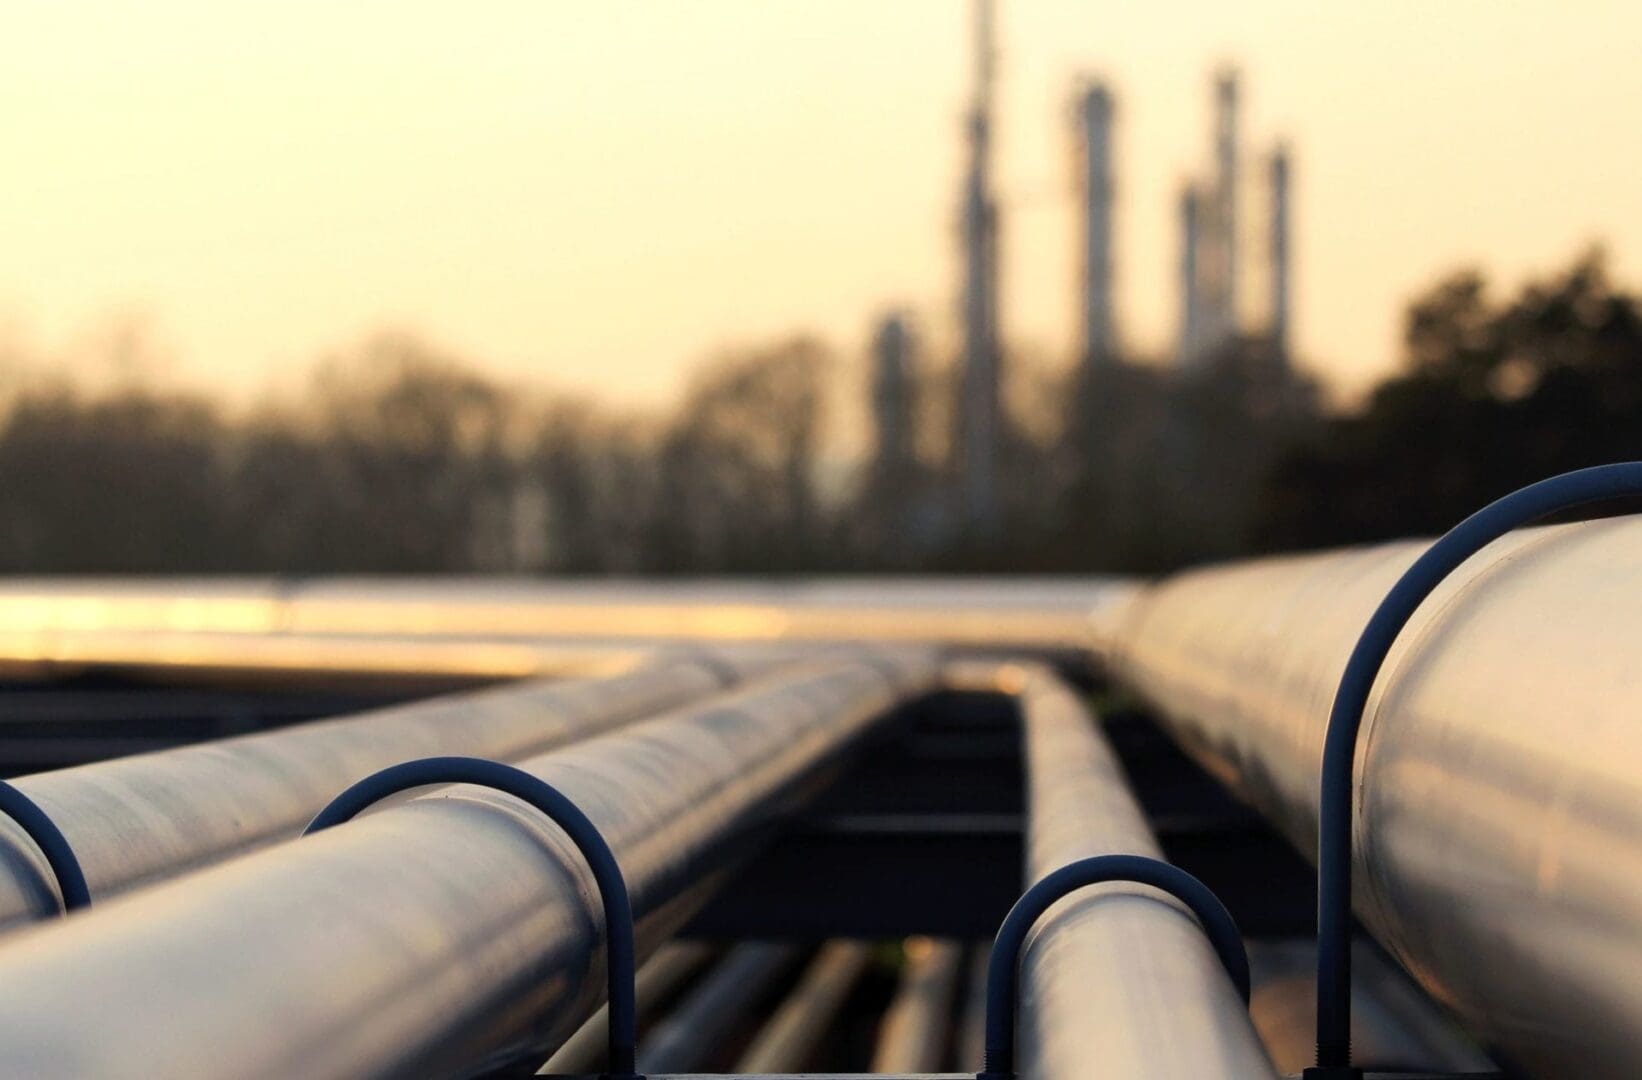 A close up of pipes in the foreground with oil refineries in the background.